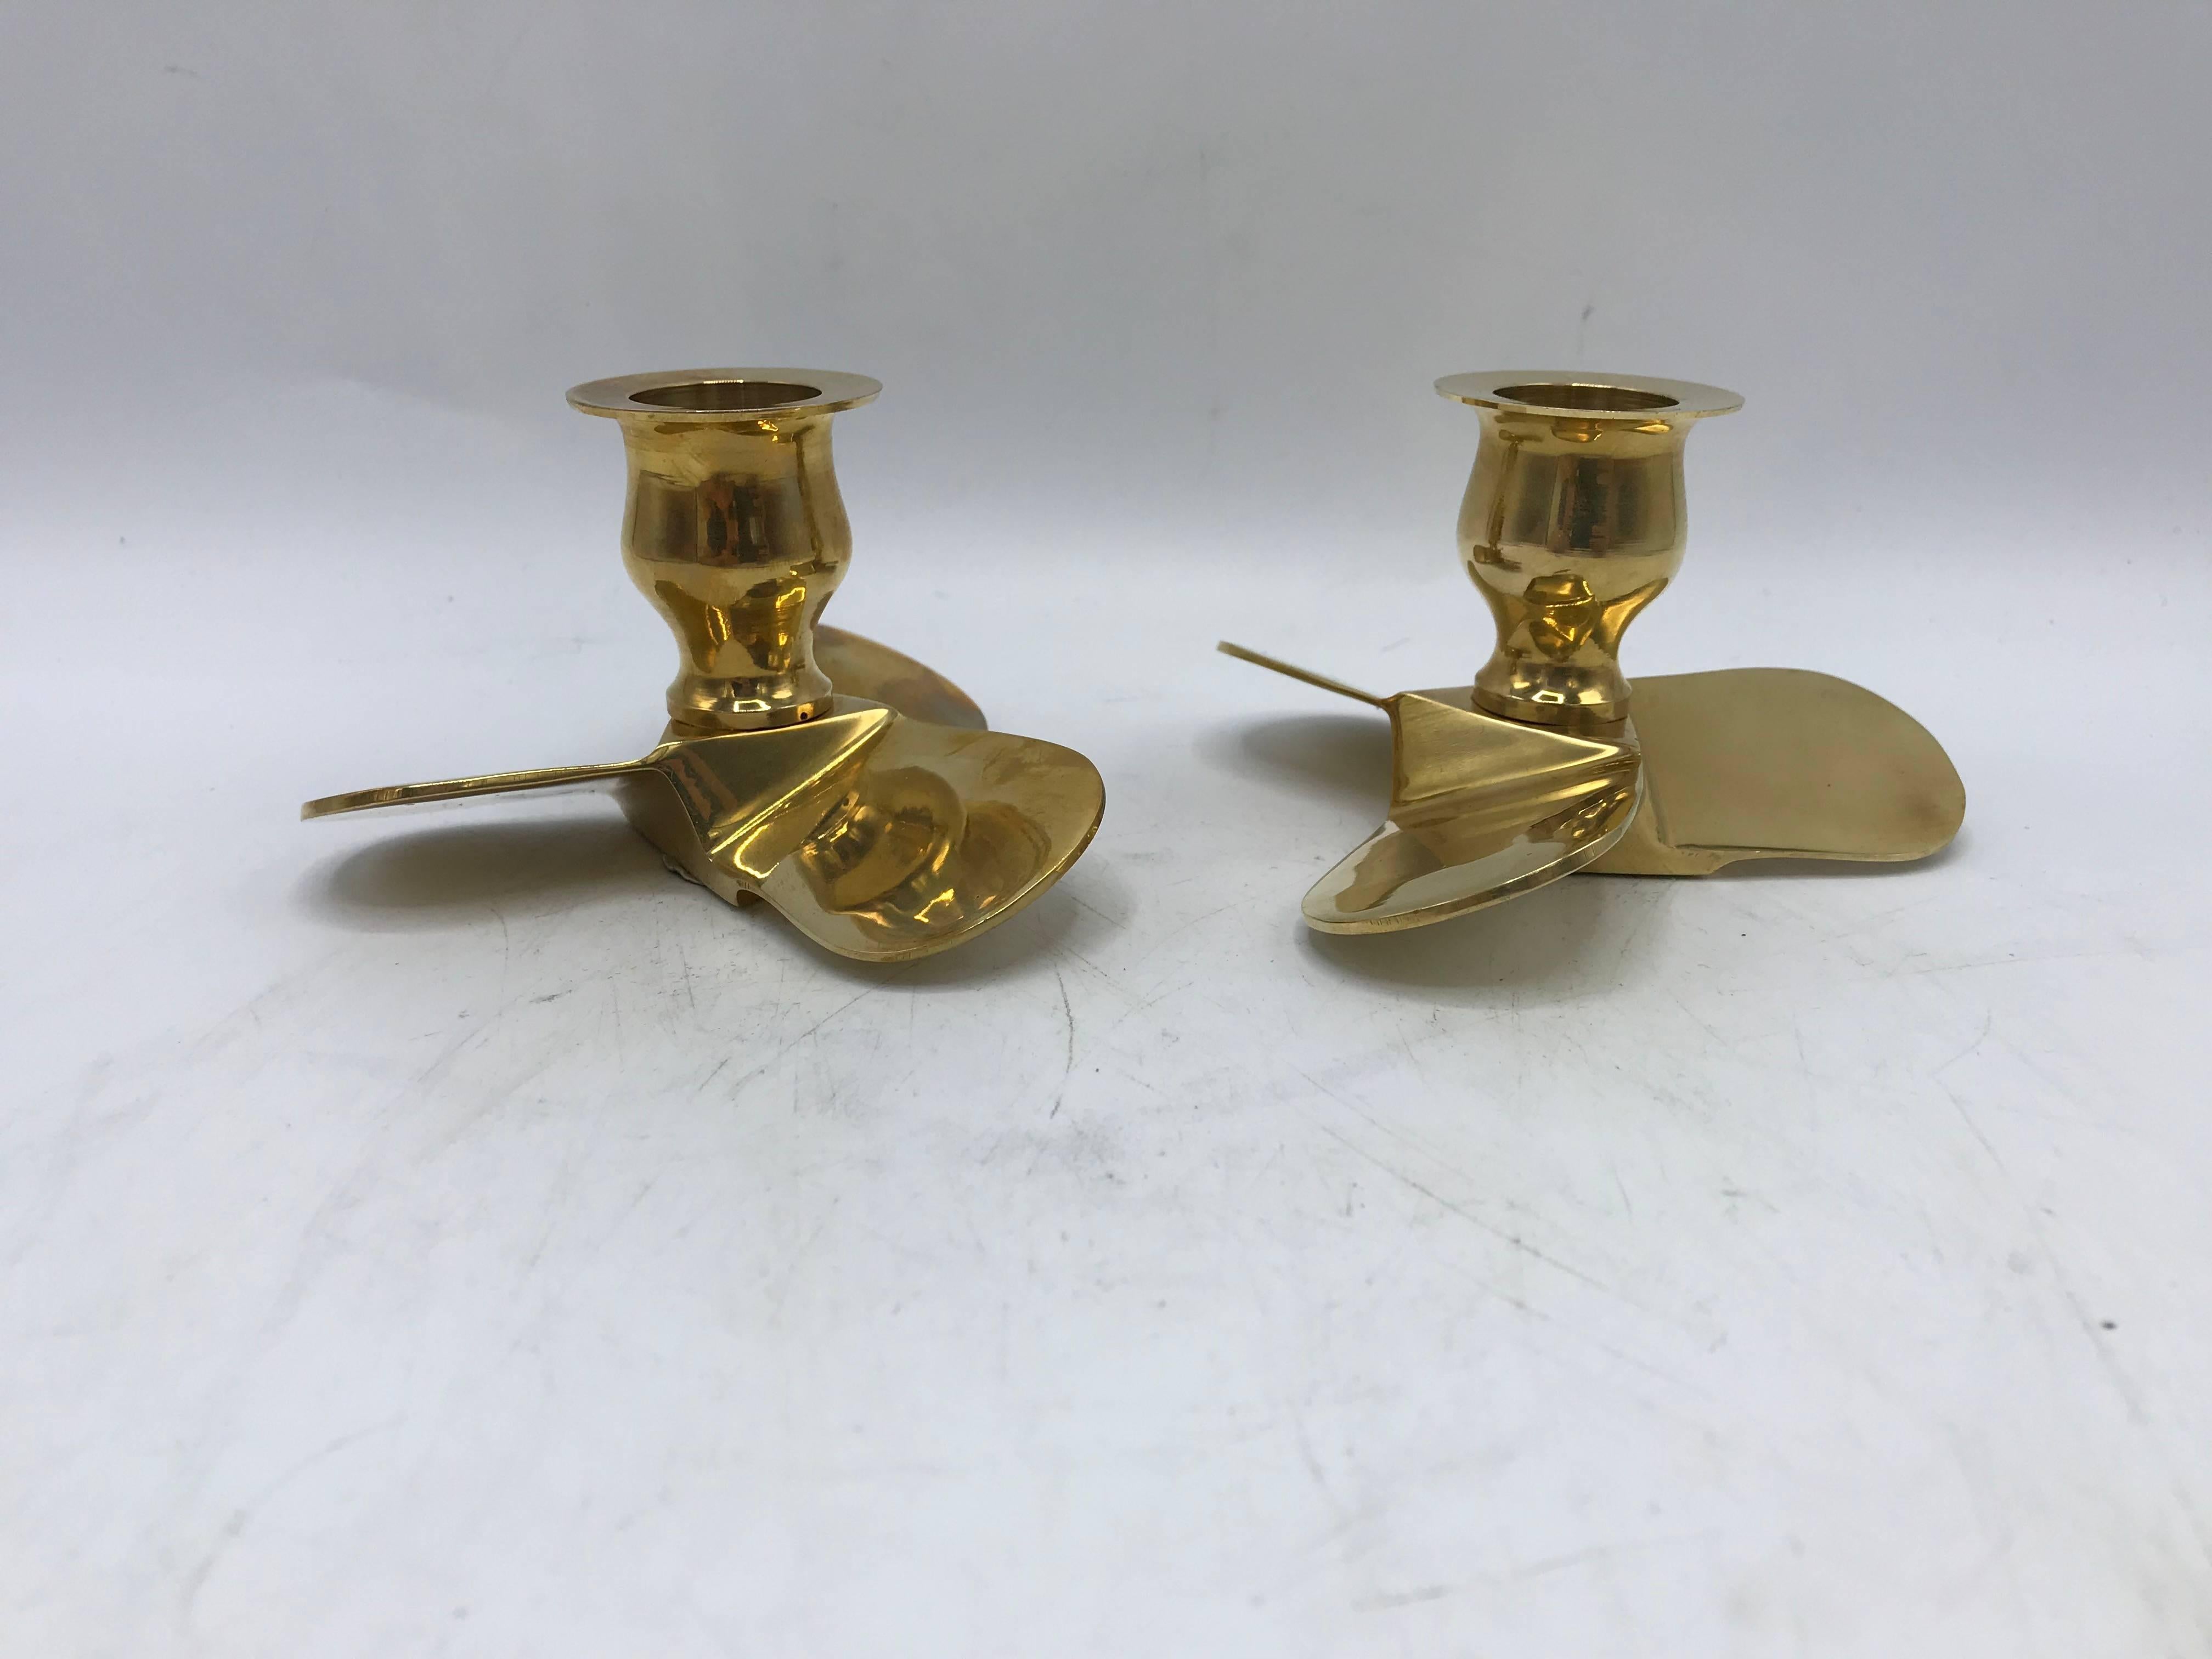 Listed is a stunning, pair of 1970s Italian polished-brass boat propeller candlestick holders. Padded on underside.